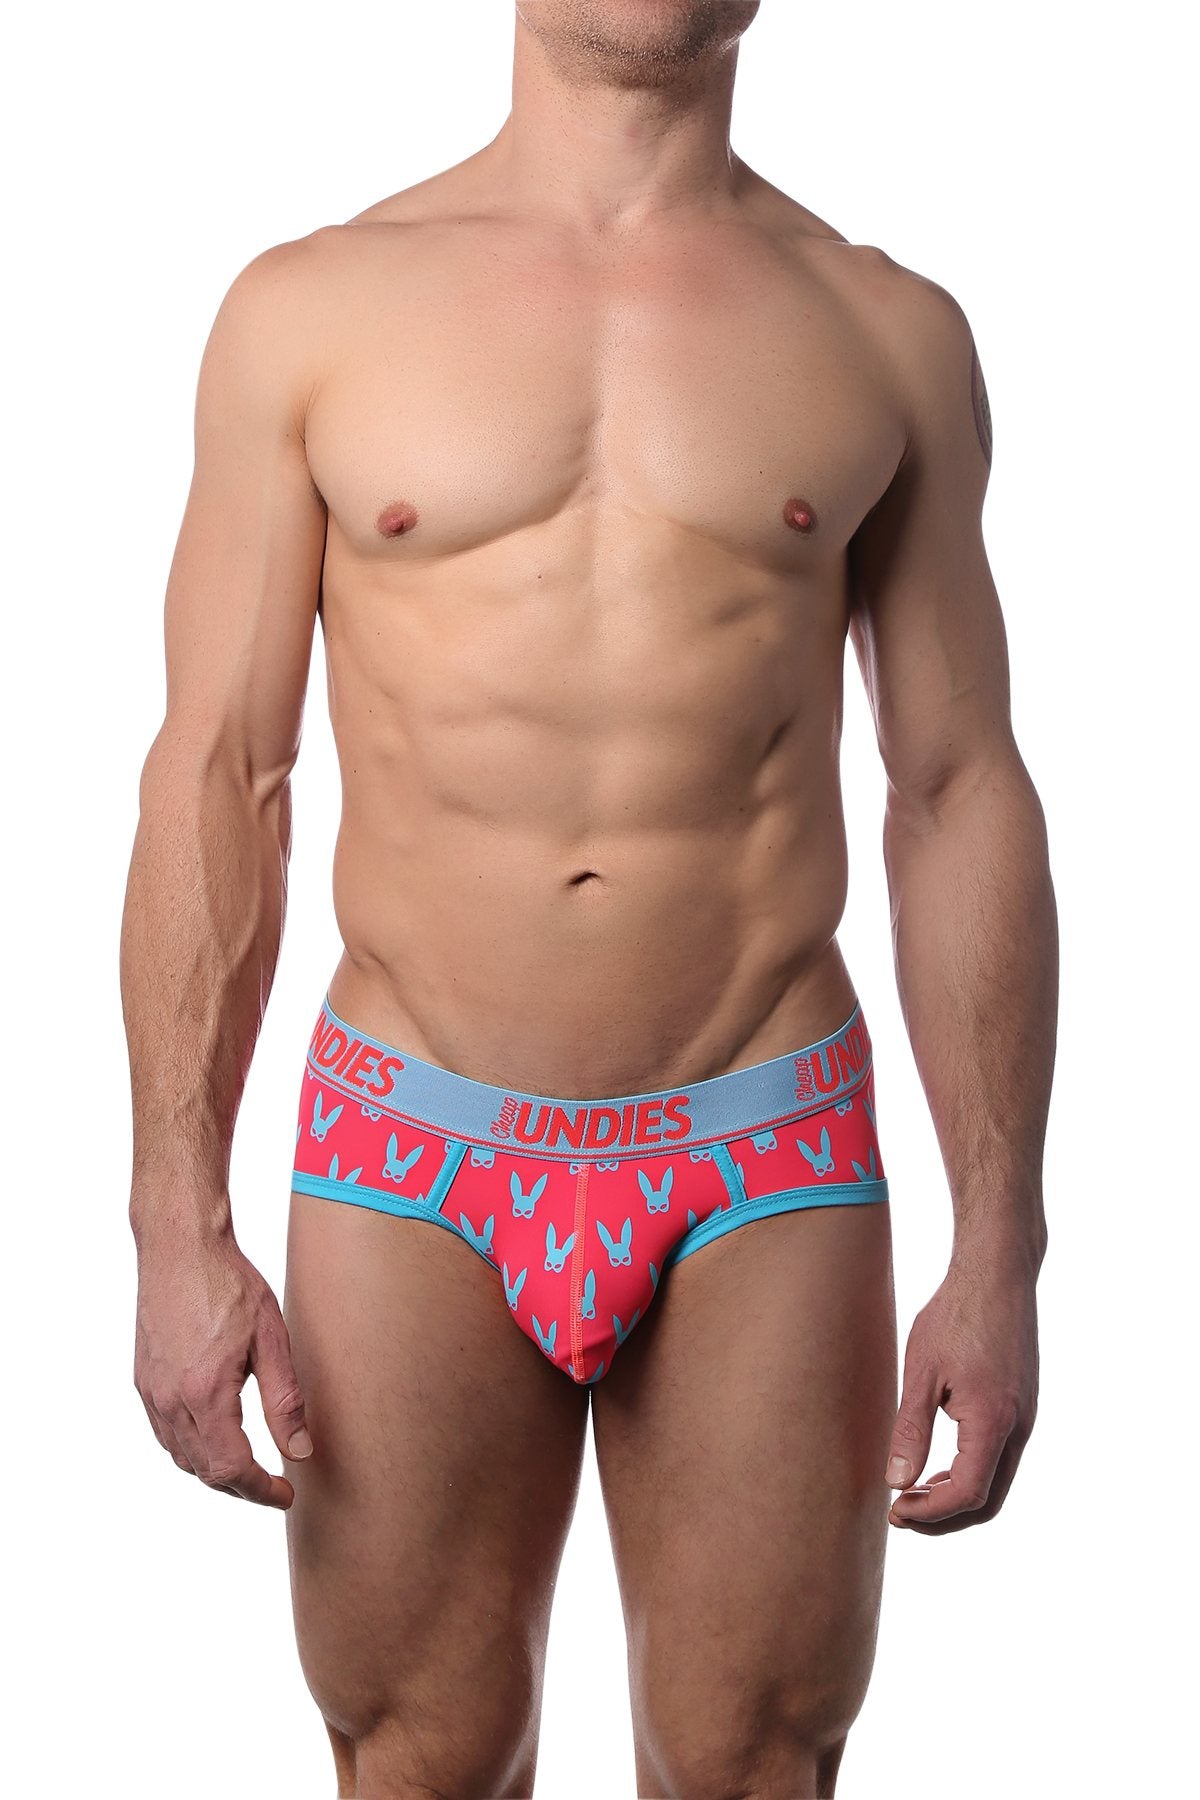 CheapUndies Coral and Baby Blue Naughty Bunny Brief